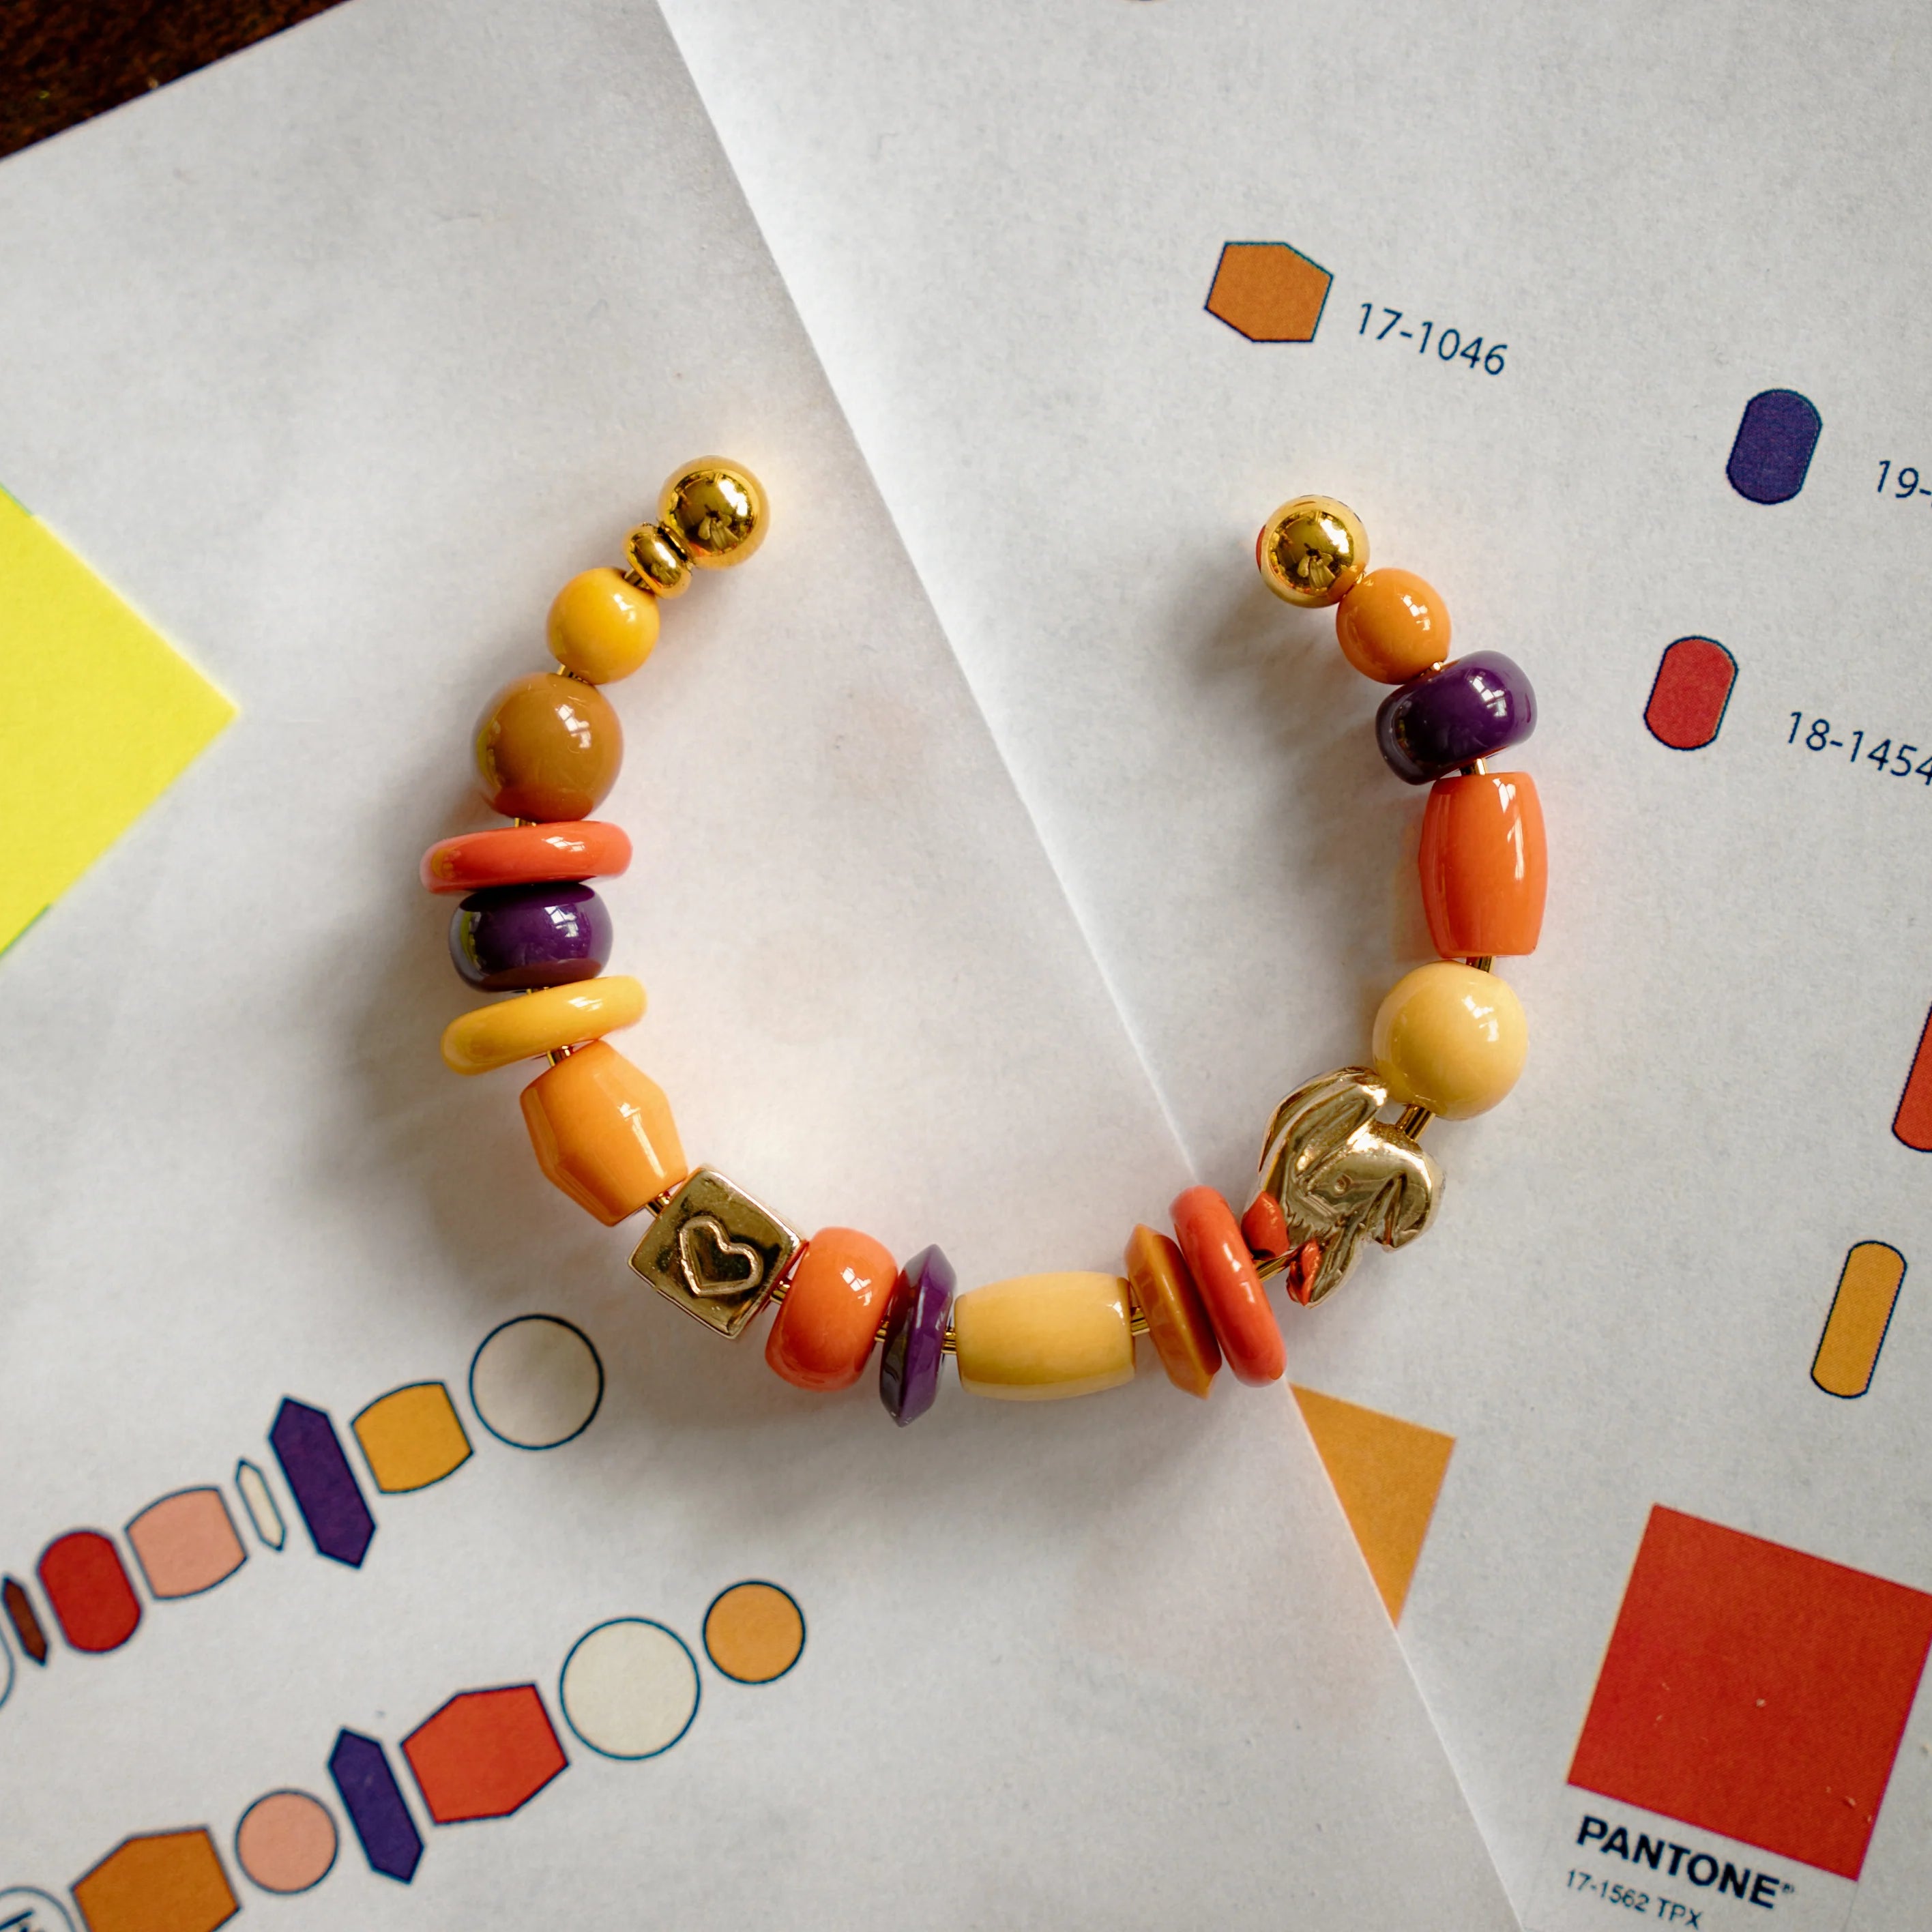 Memory Palace Bracelet resting on paper with color swatches